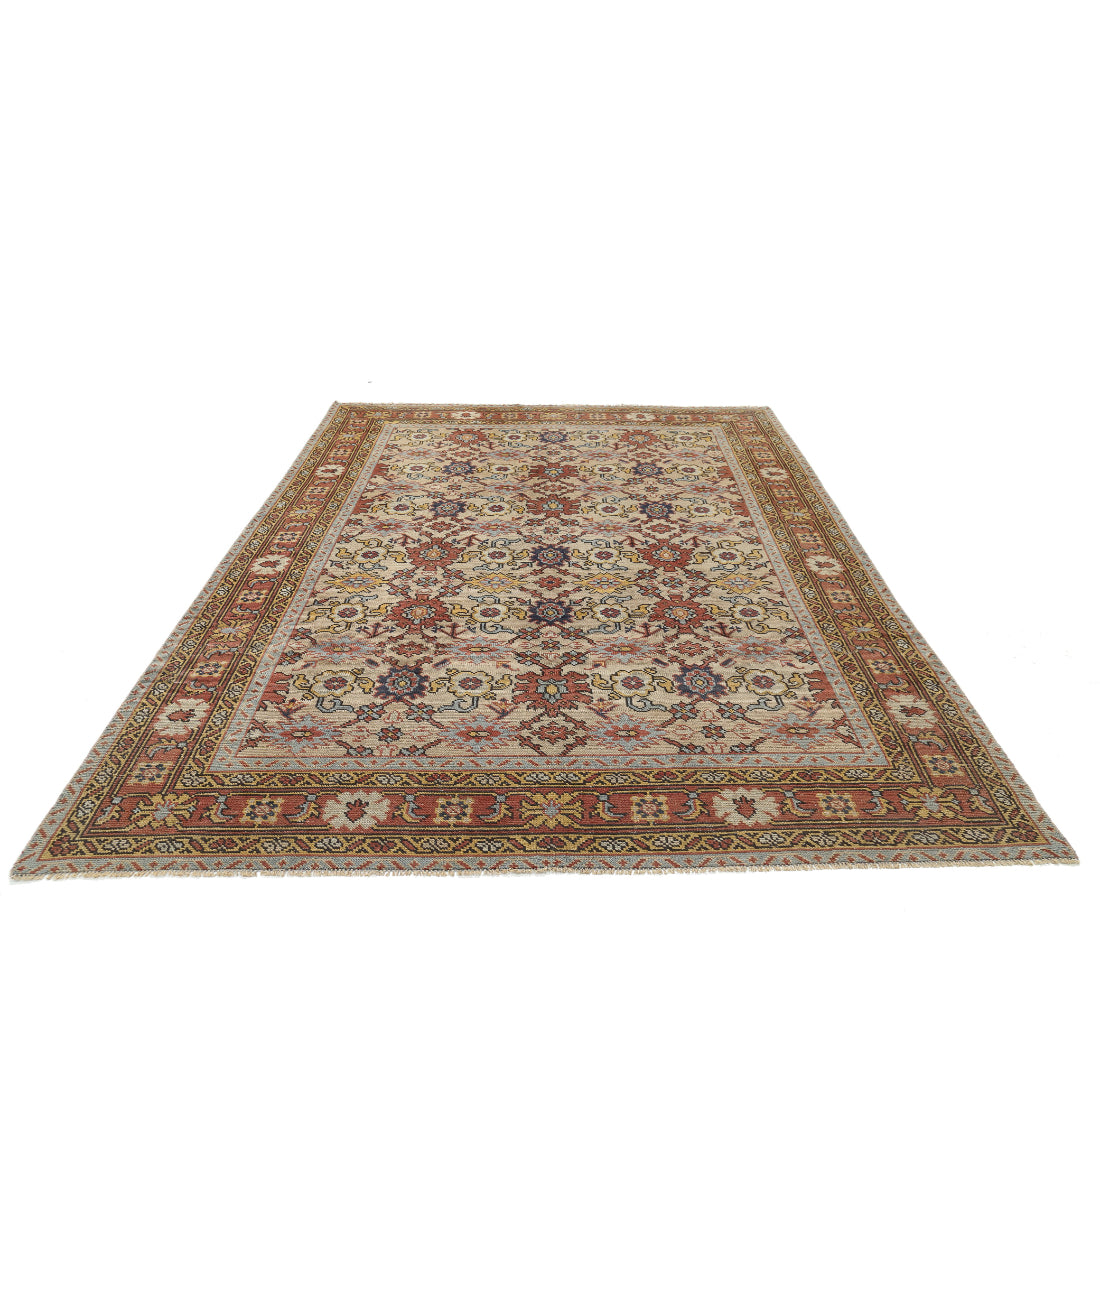 Hand Knotted Antique Turkish Oushak Wool Rug - 8'0'' x 11'0'' 8'0'' x 11'0'' (240 X 330) / Ivory / Rust